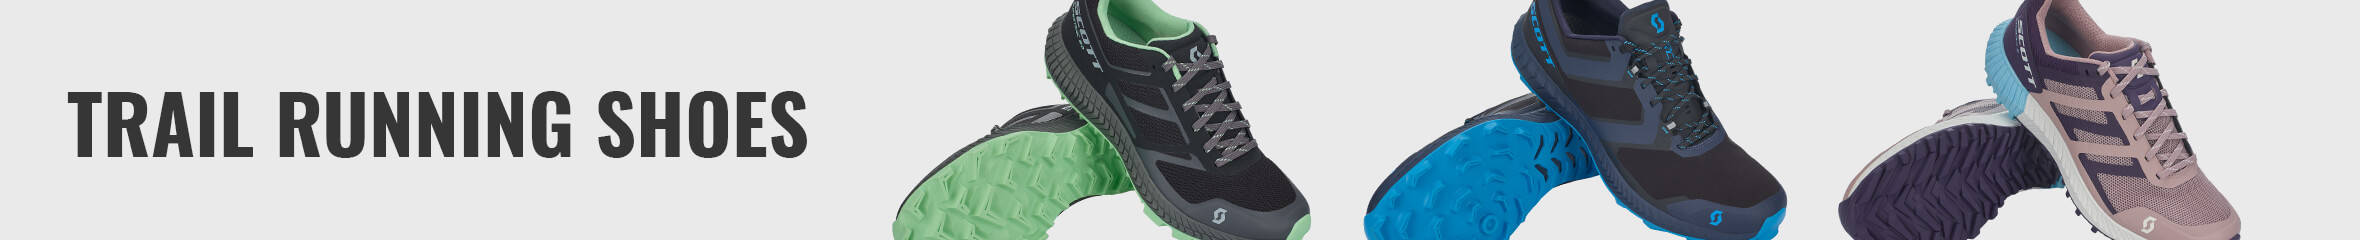 Running Trail Shoes